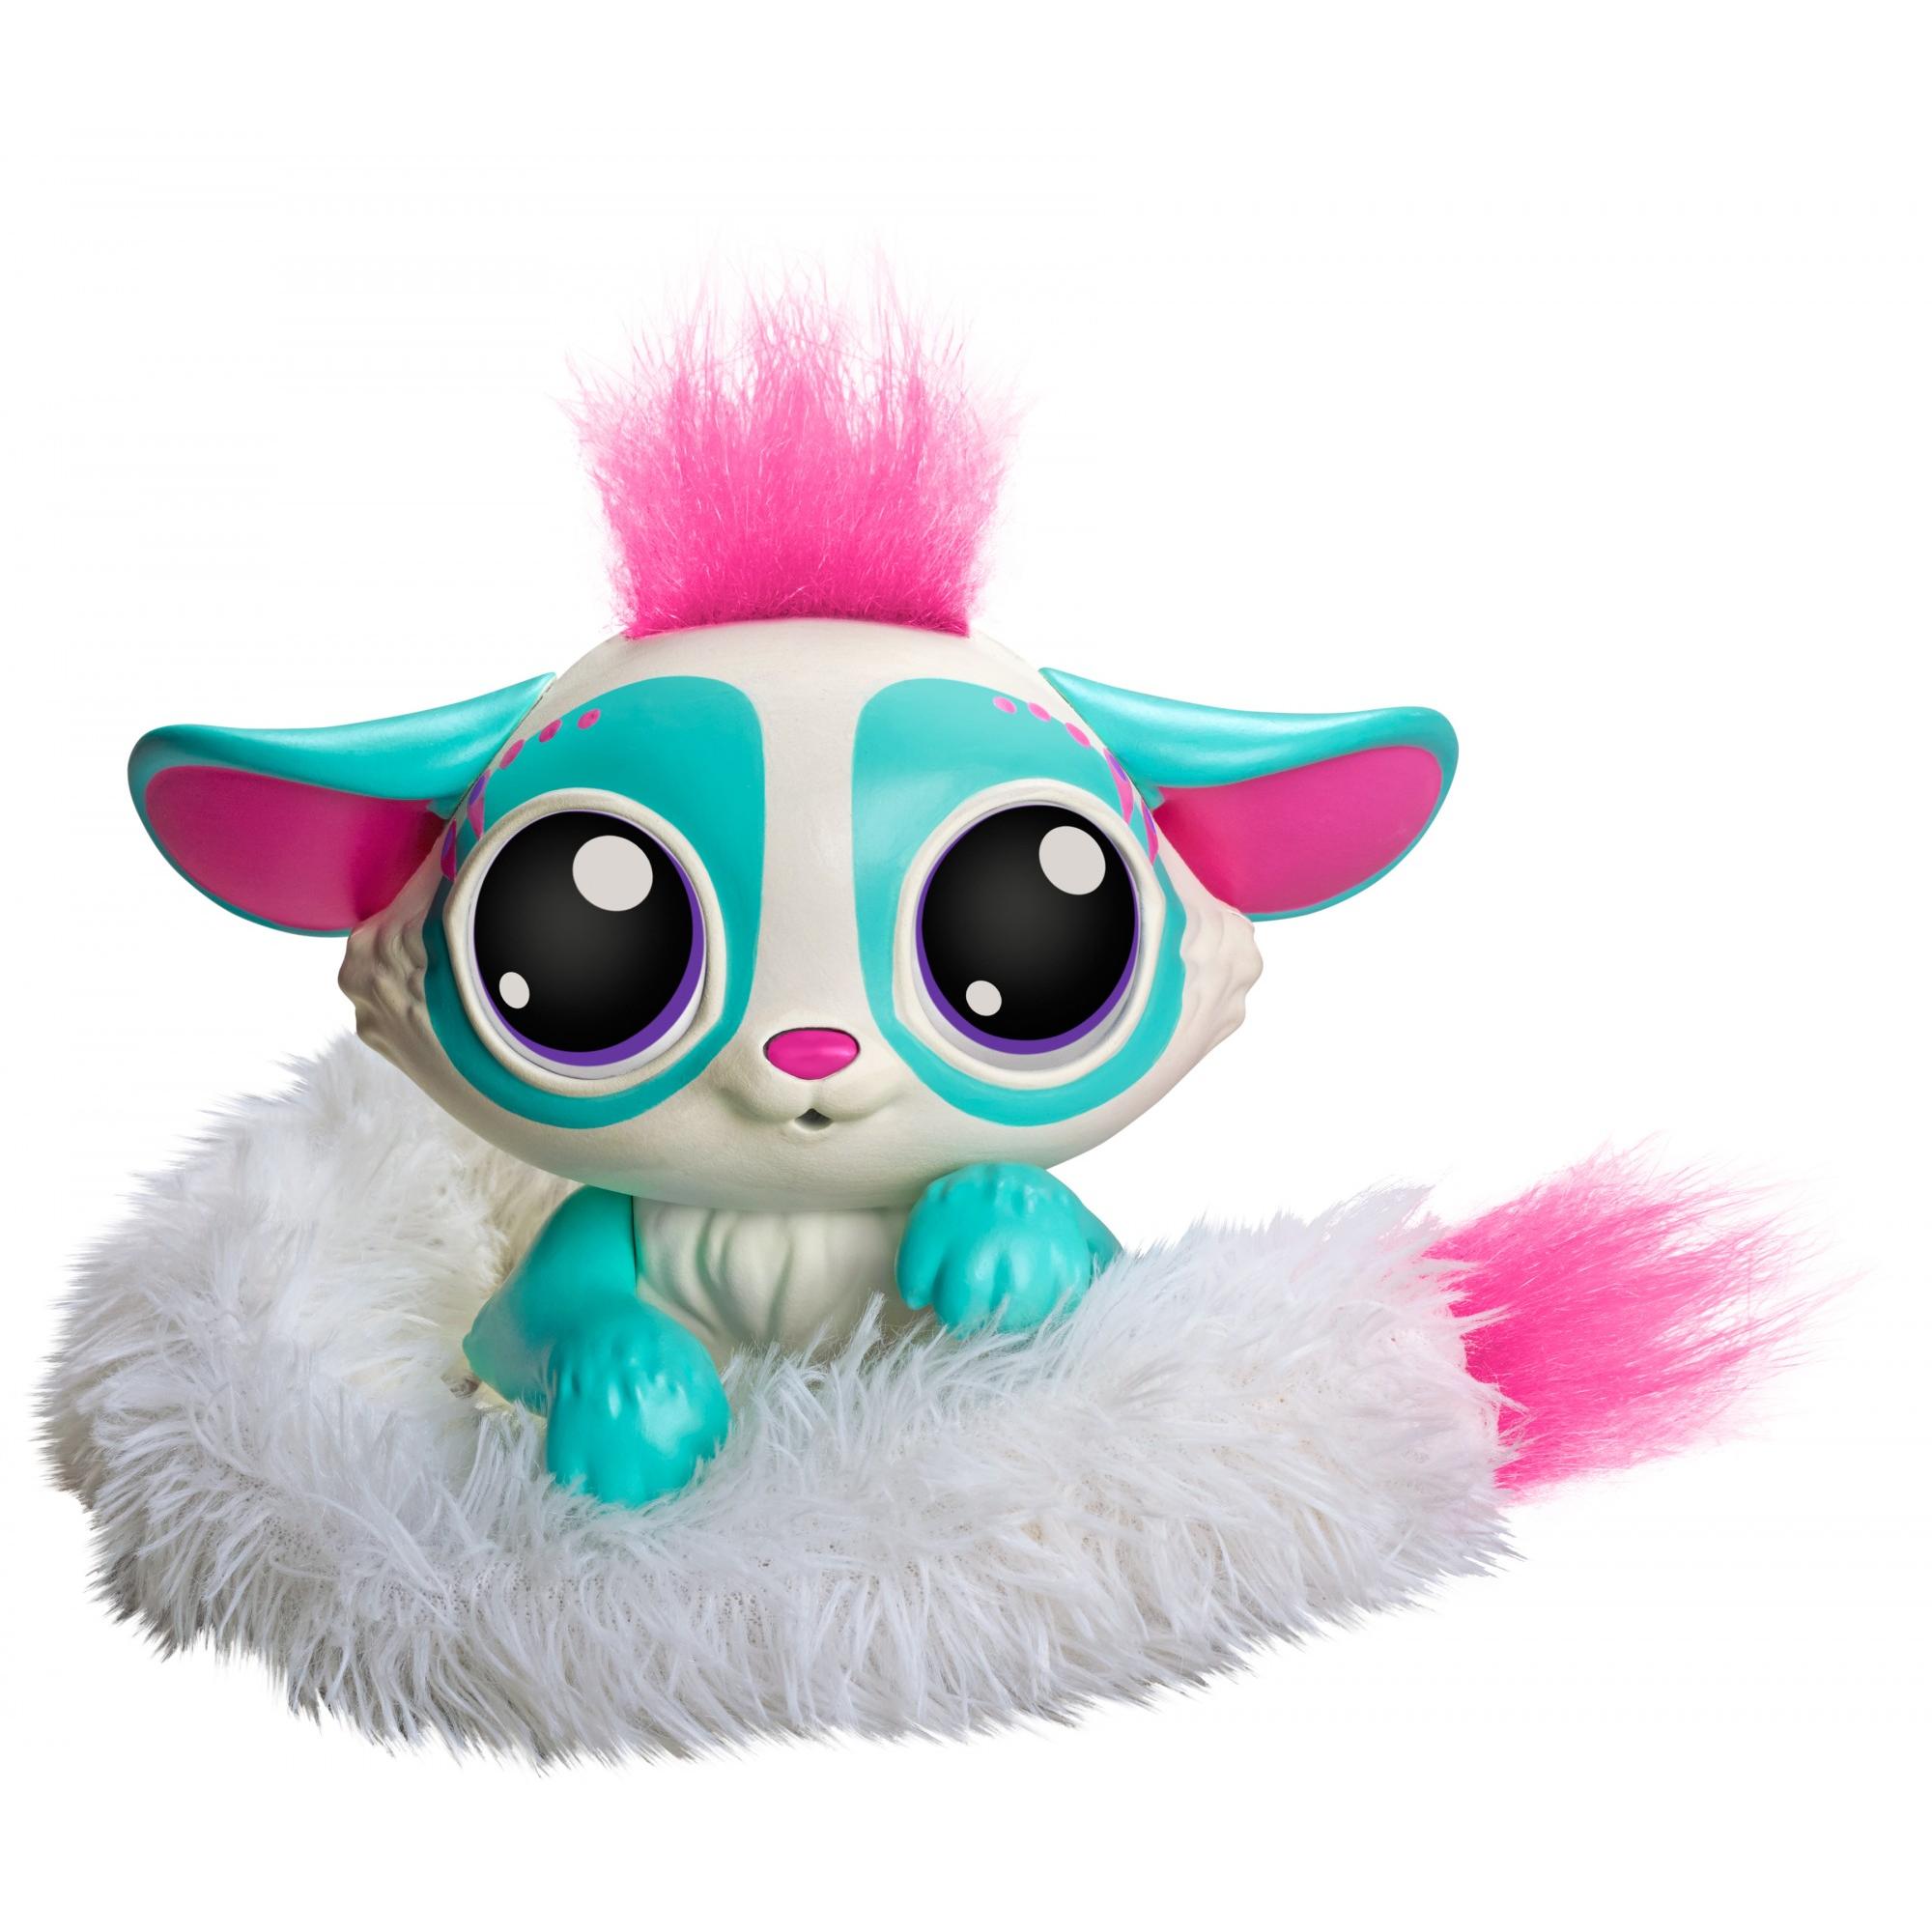 Lil' Gleemerz Amiglow Furry Friend, Light Up Interactive Talking Toy - image 1 of 10